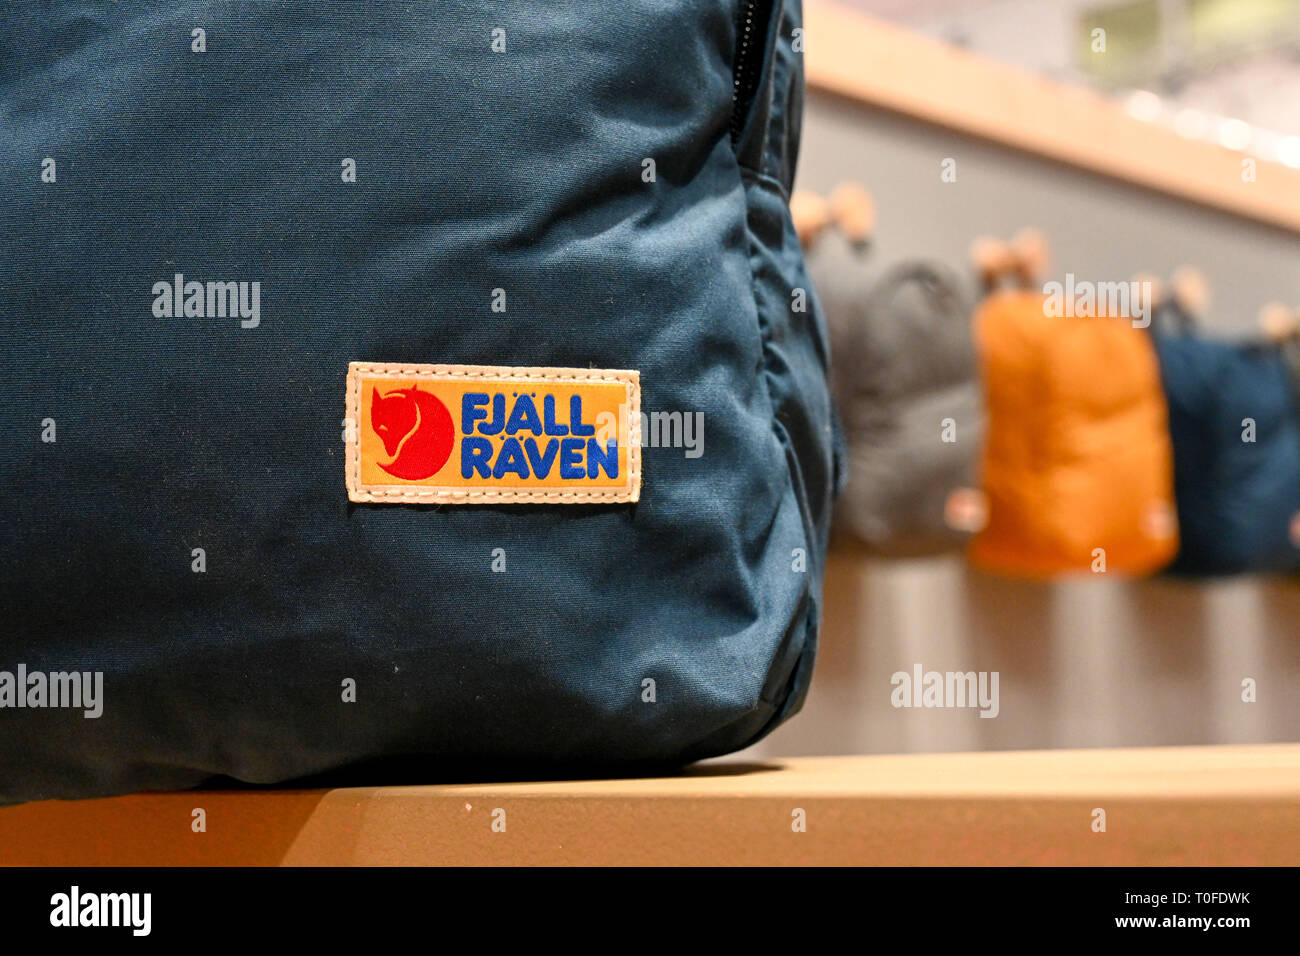 04 February 2019, Bavaria, München: The logo of the Swedish outdoor outfitter Fjällräven on a backpack, taken at the ISPO sporting goods fair. Photo: Tobias Hase/dpa Stock Photo